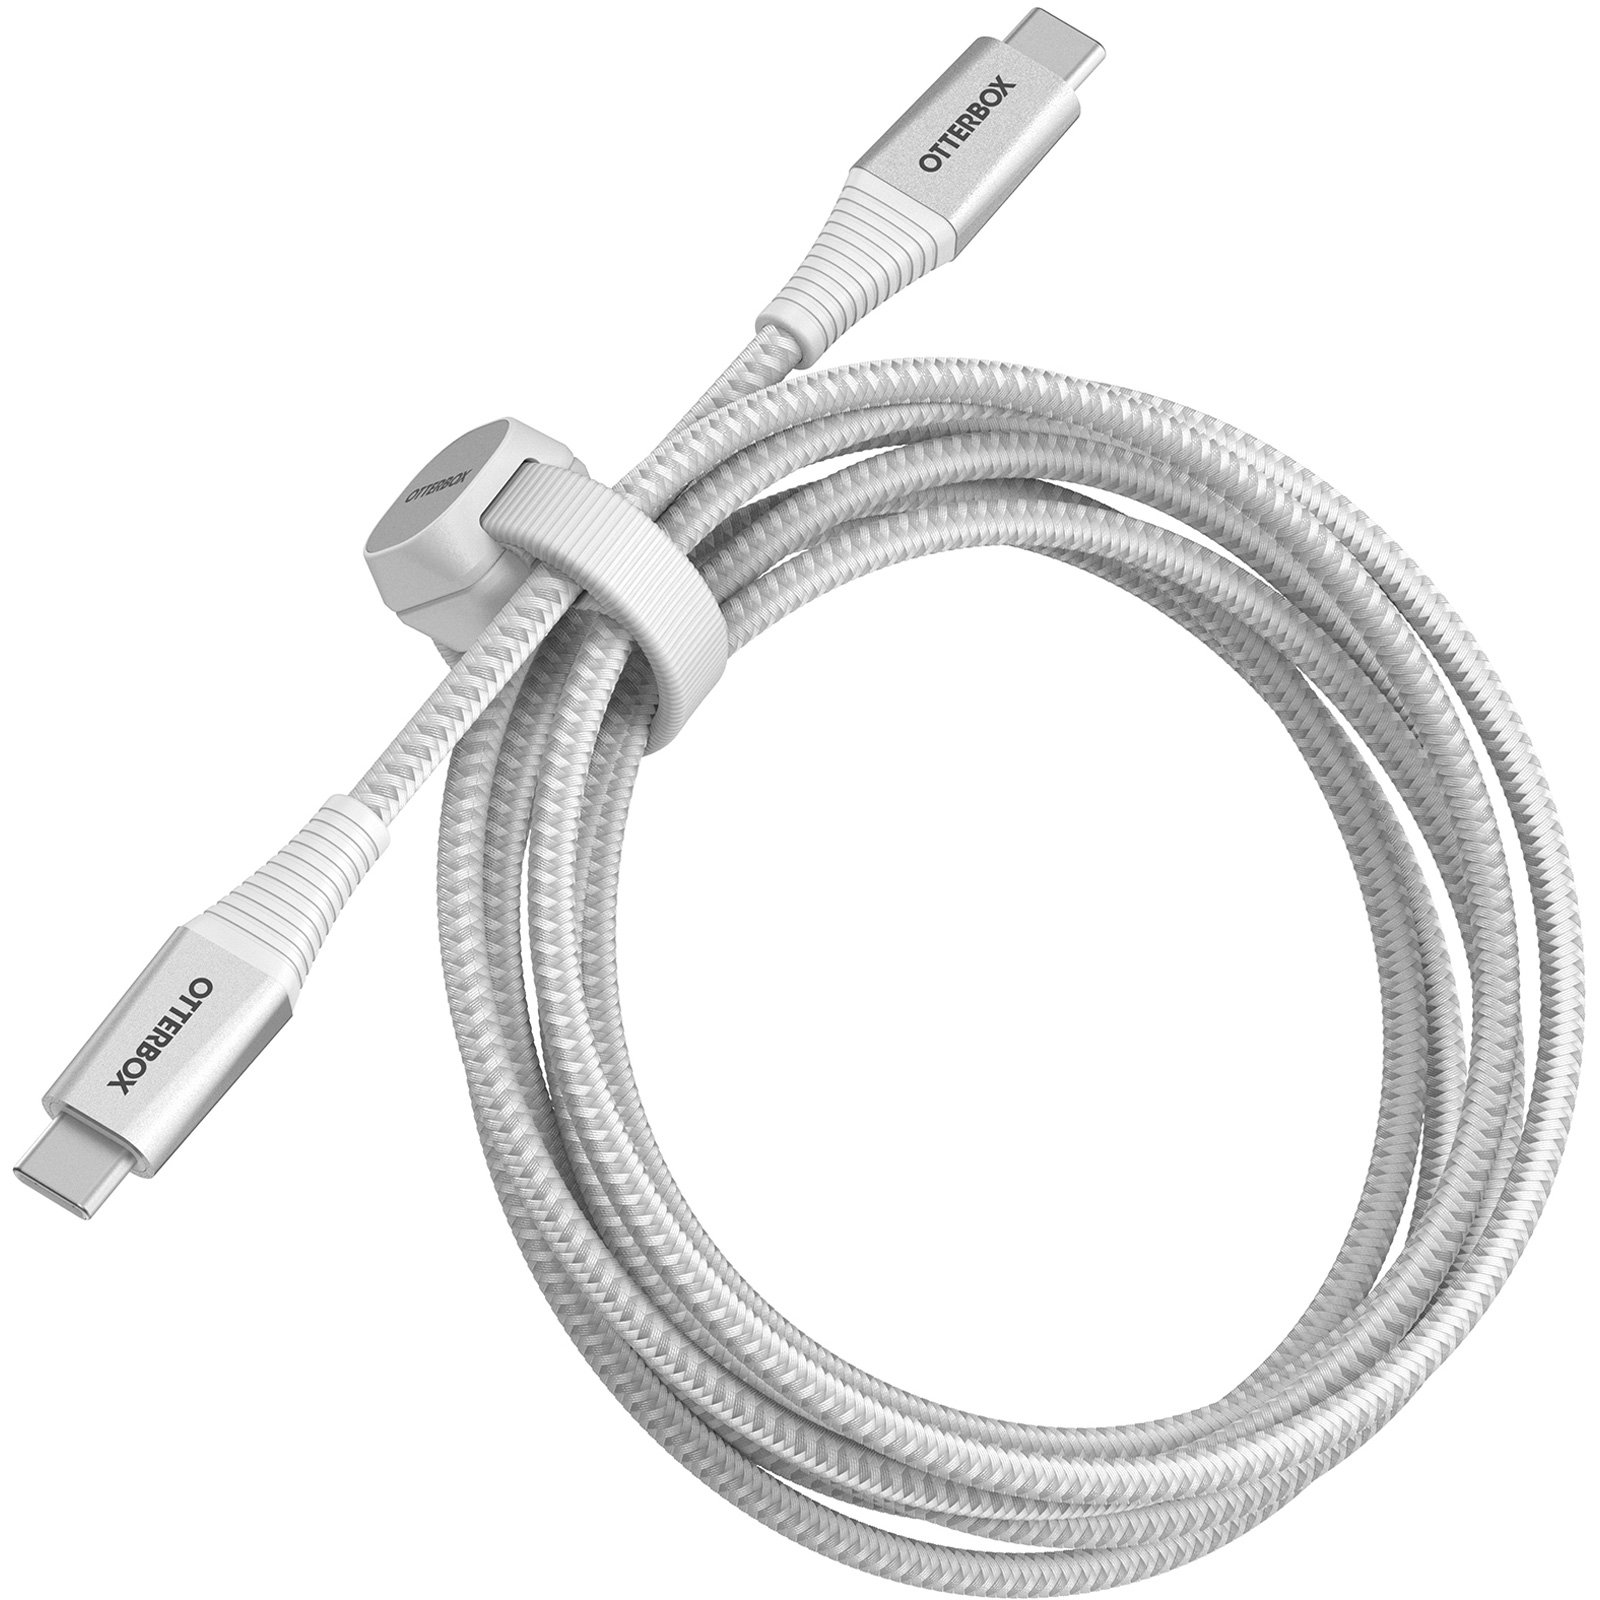 Buy Apple Type C to MagSafe 3 6.6 Feet (2M) Cable (Magnetic